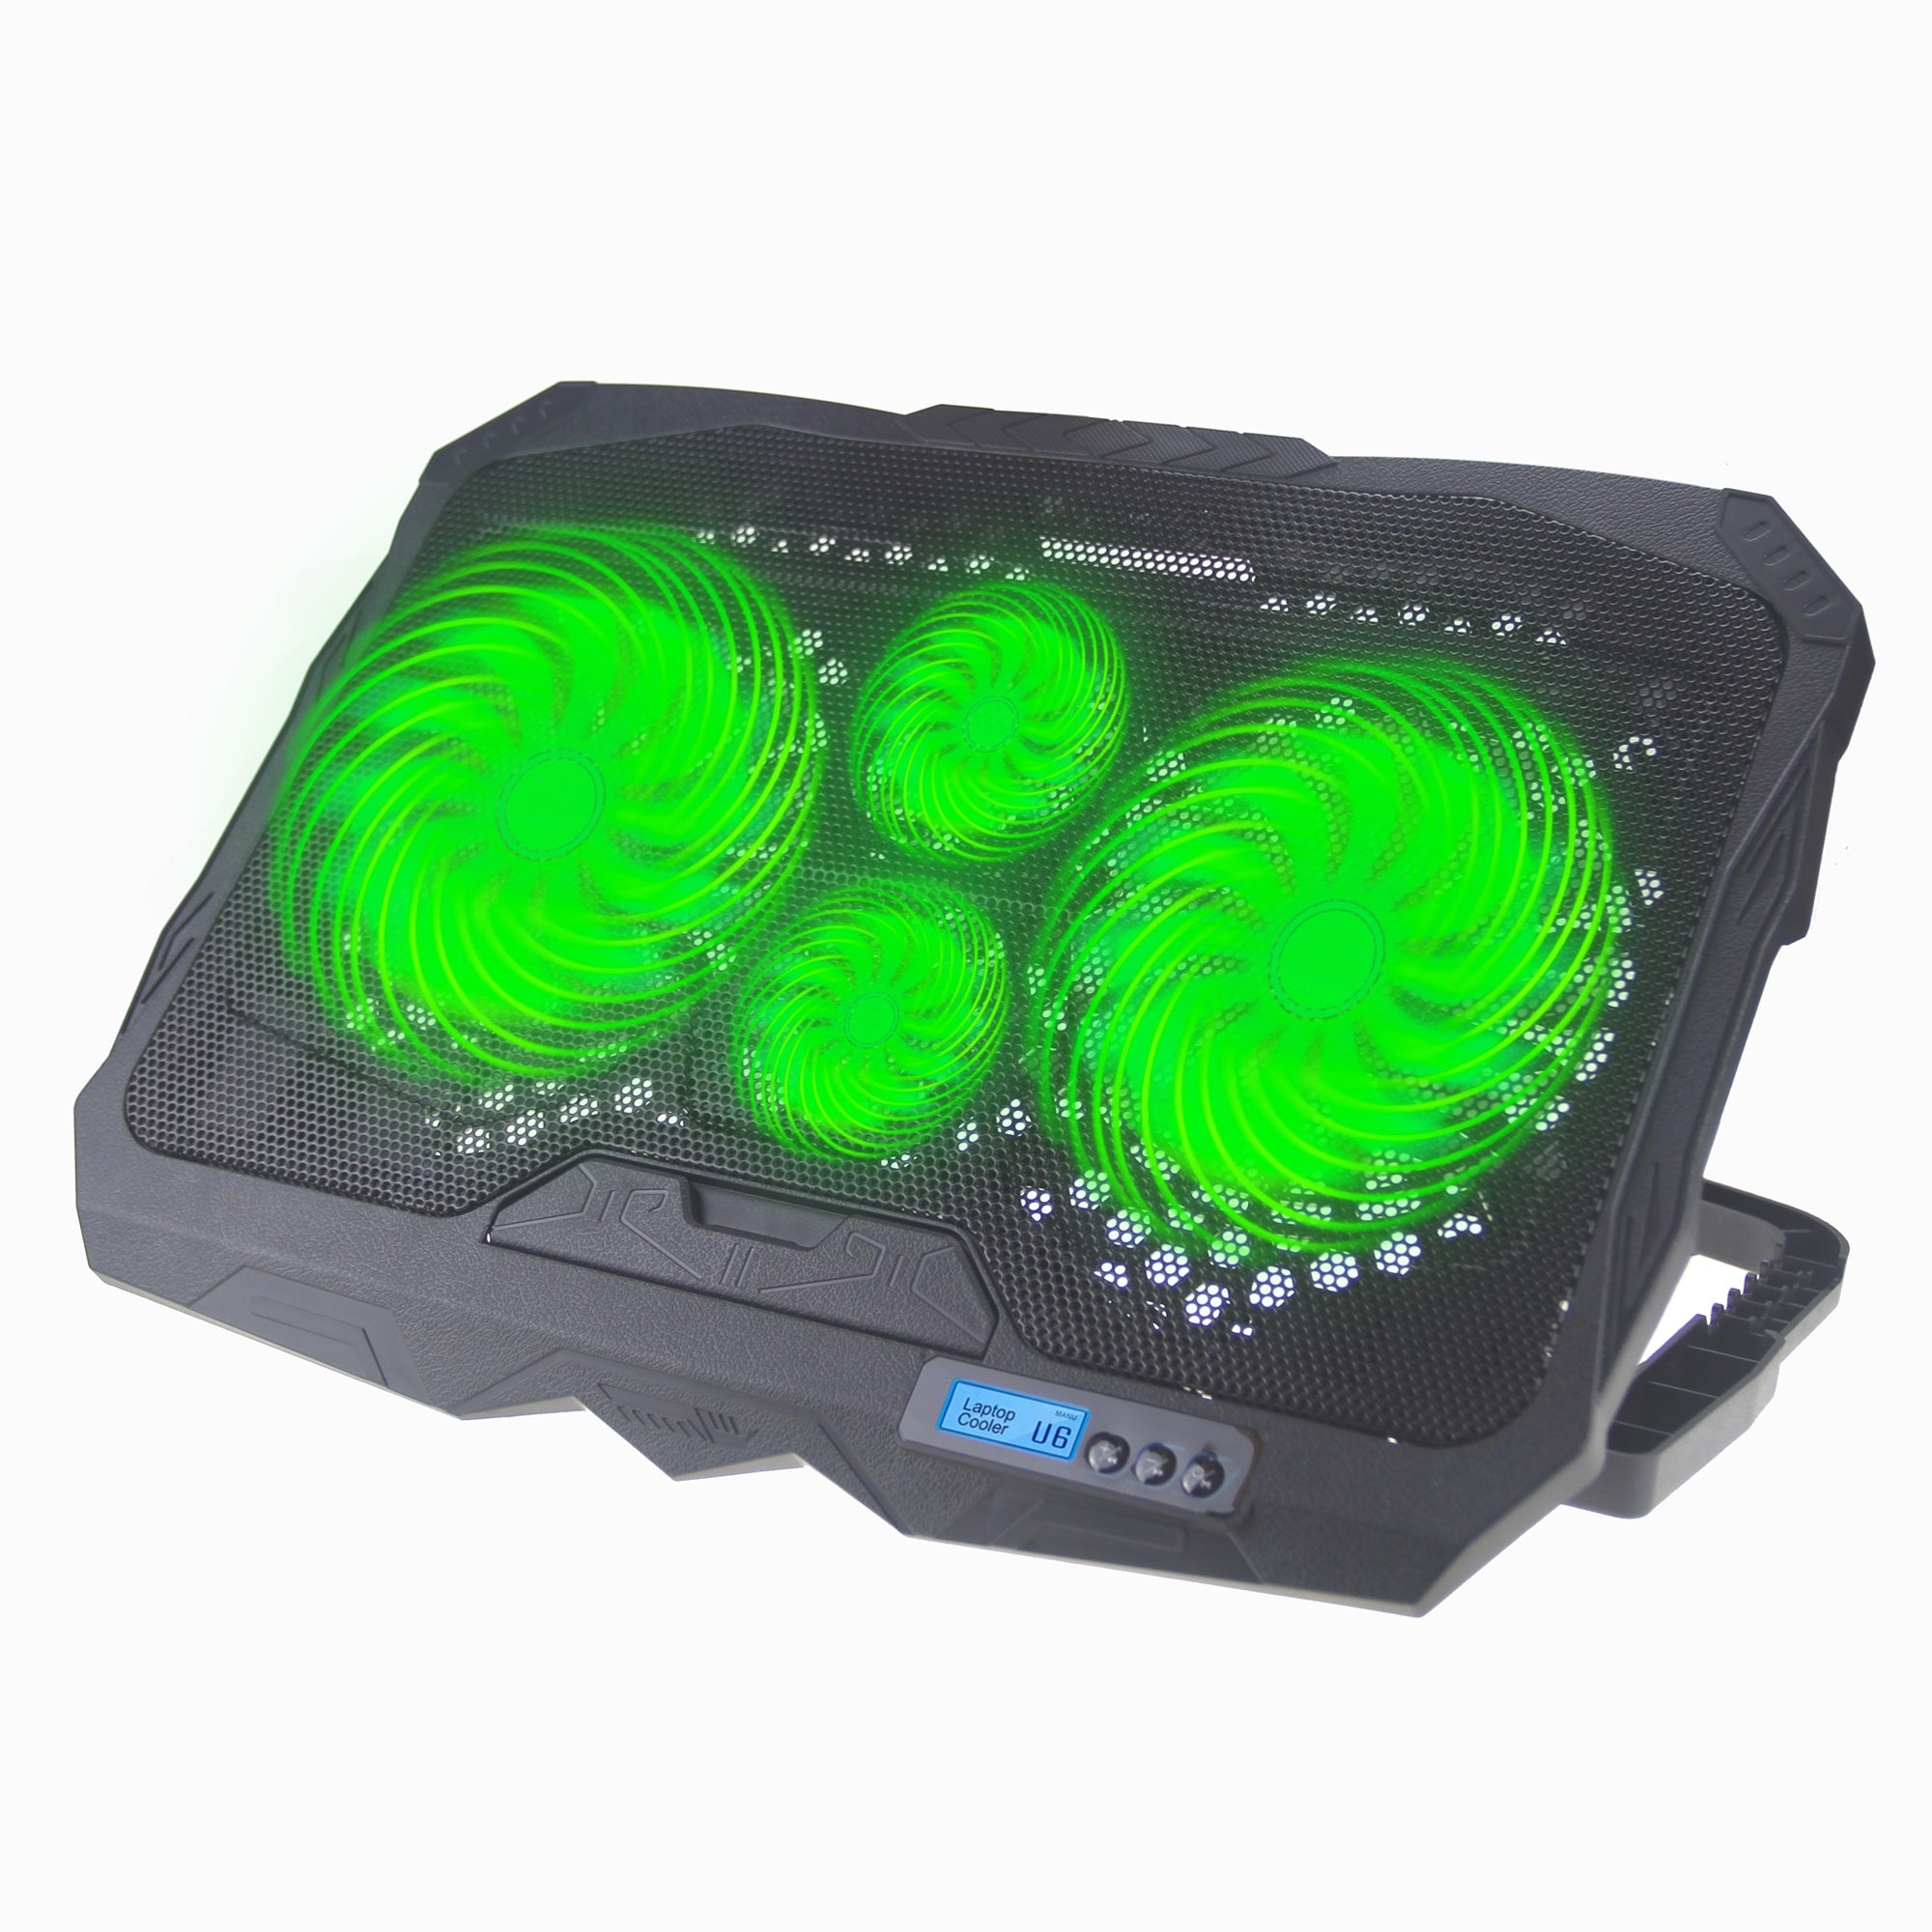 S18 Notebook Router 4-Fan Cooler Radiator Adjustable Wind Speed Laptop Cooling Pad with Display Screen - Green Light